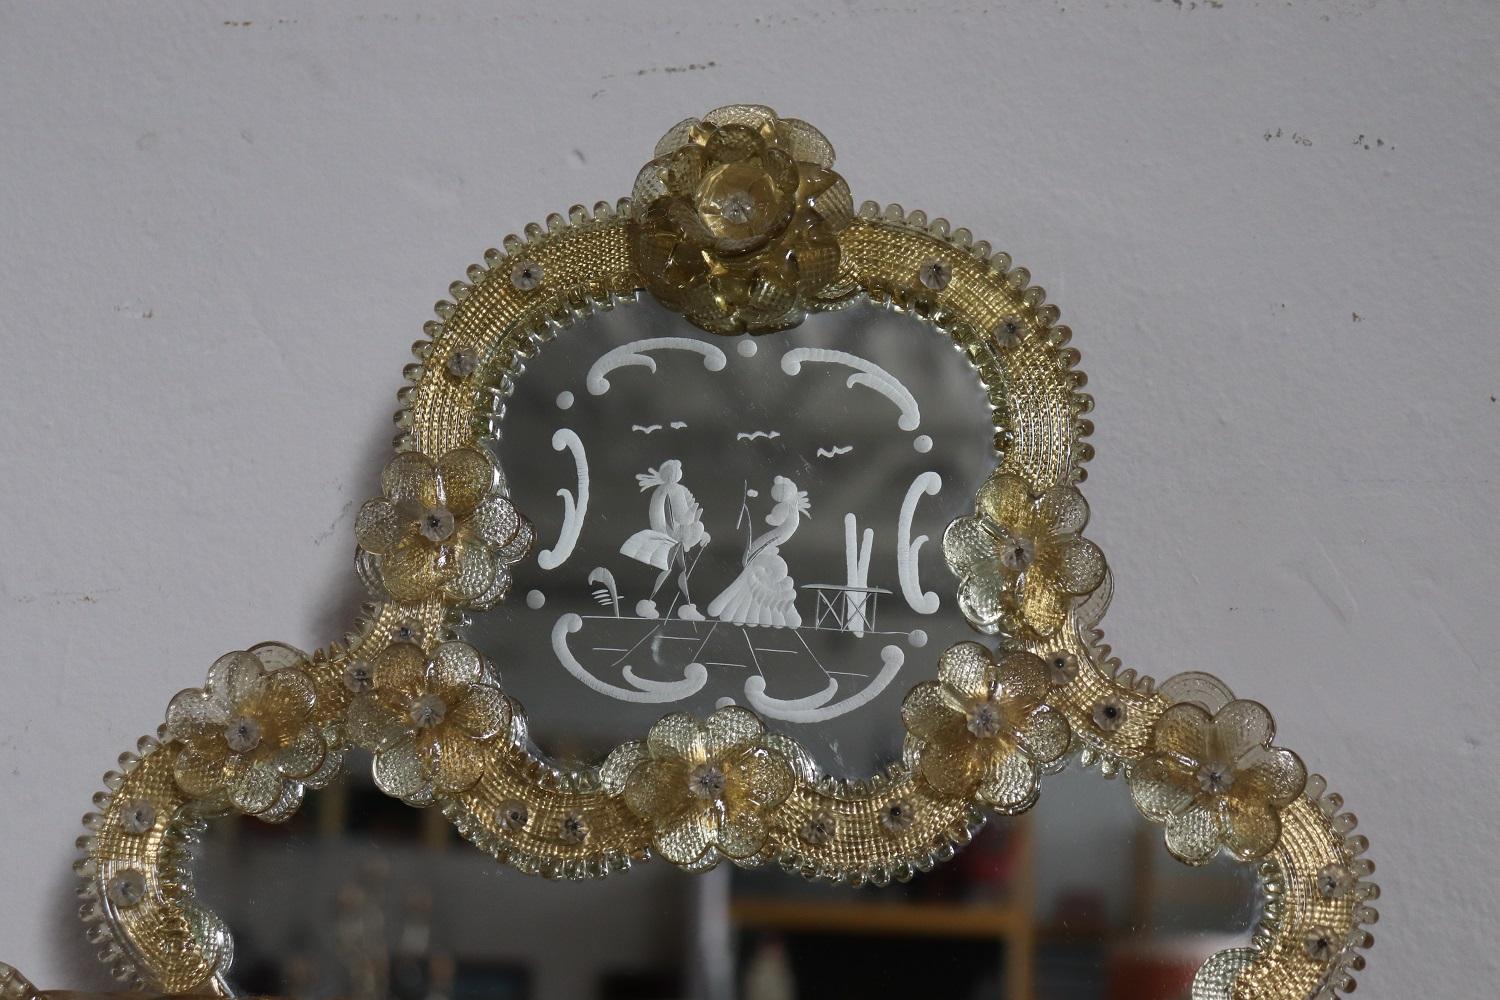 Beautiful elegant Italian Murano art glass wall mirror. Characterized by golden yellow decorative vegetal and floral glass elements. Rich decoration engraved in the mirror with a love scene between a young couple in the upper part. The artistic